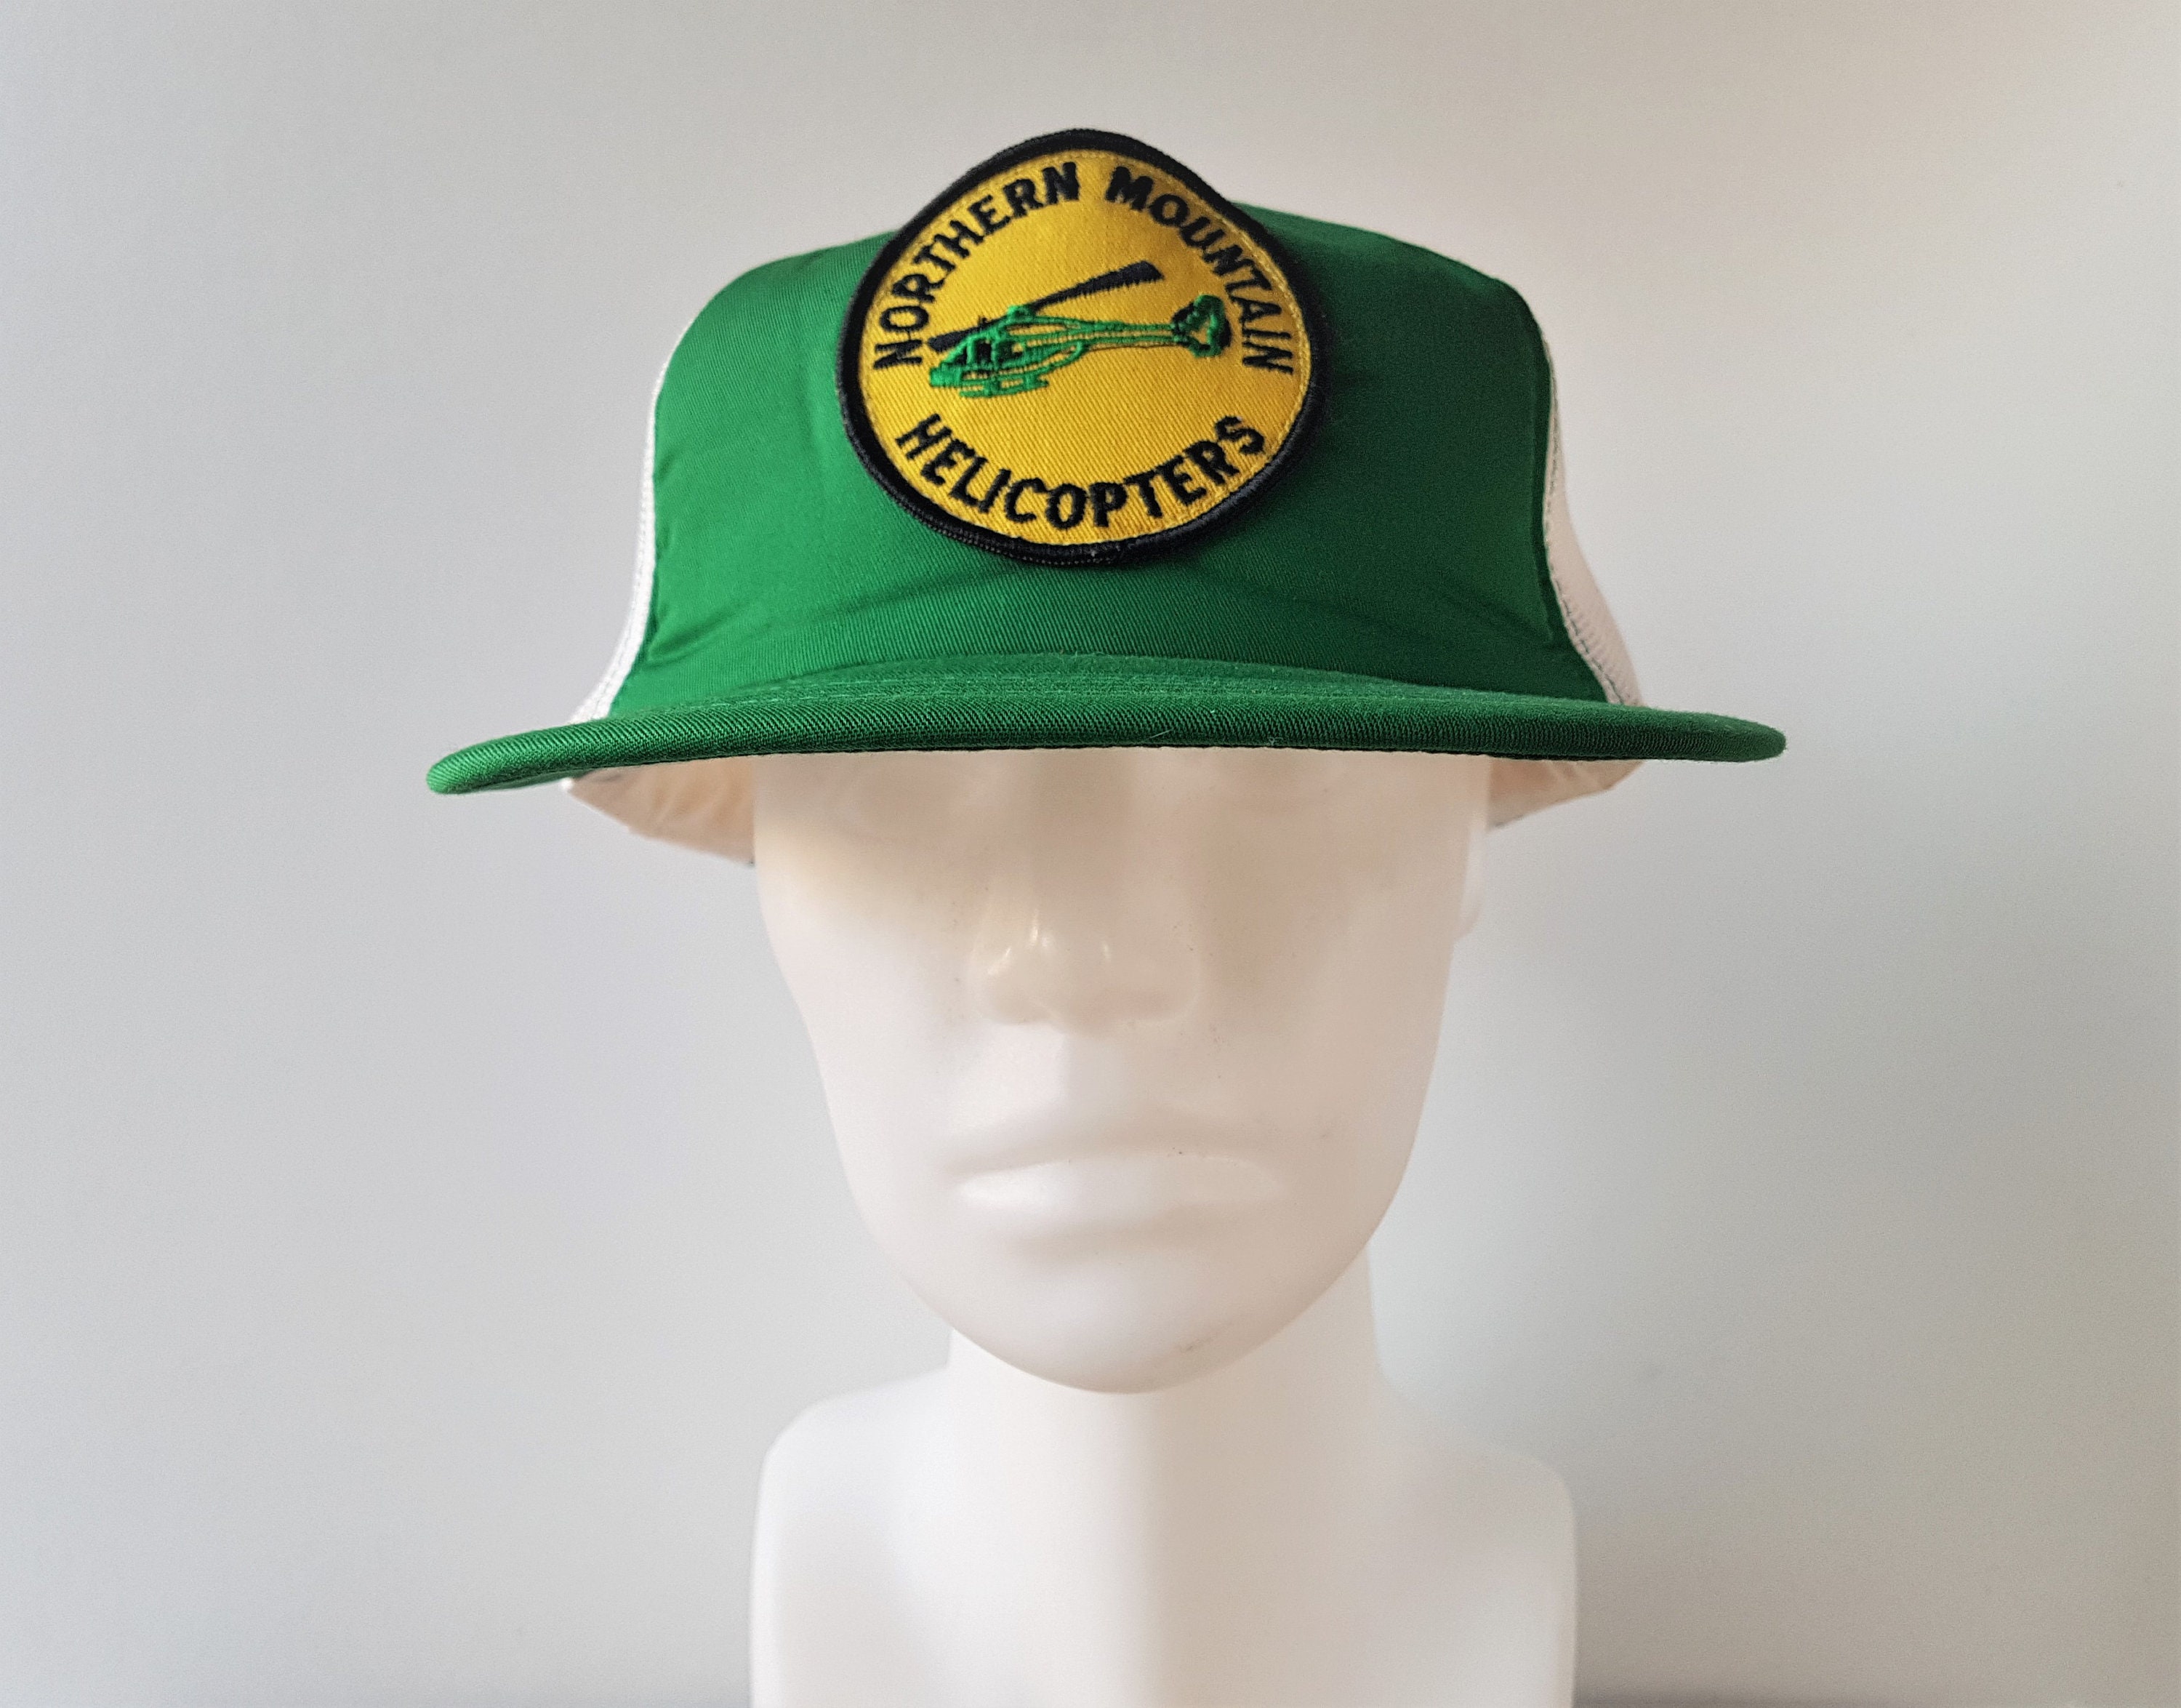 Vintage 1980s NORTHERN MOUNTAIN Helicopters Trucker Hat - Etsy 